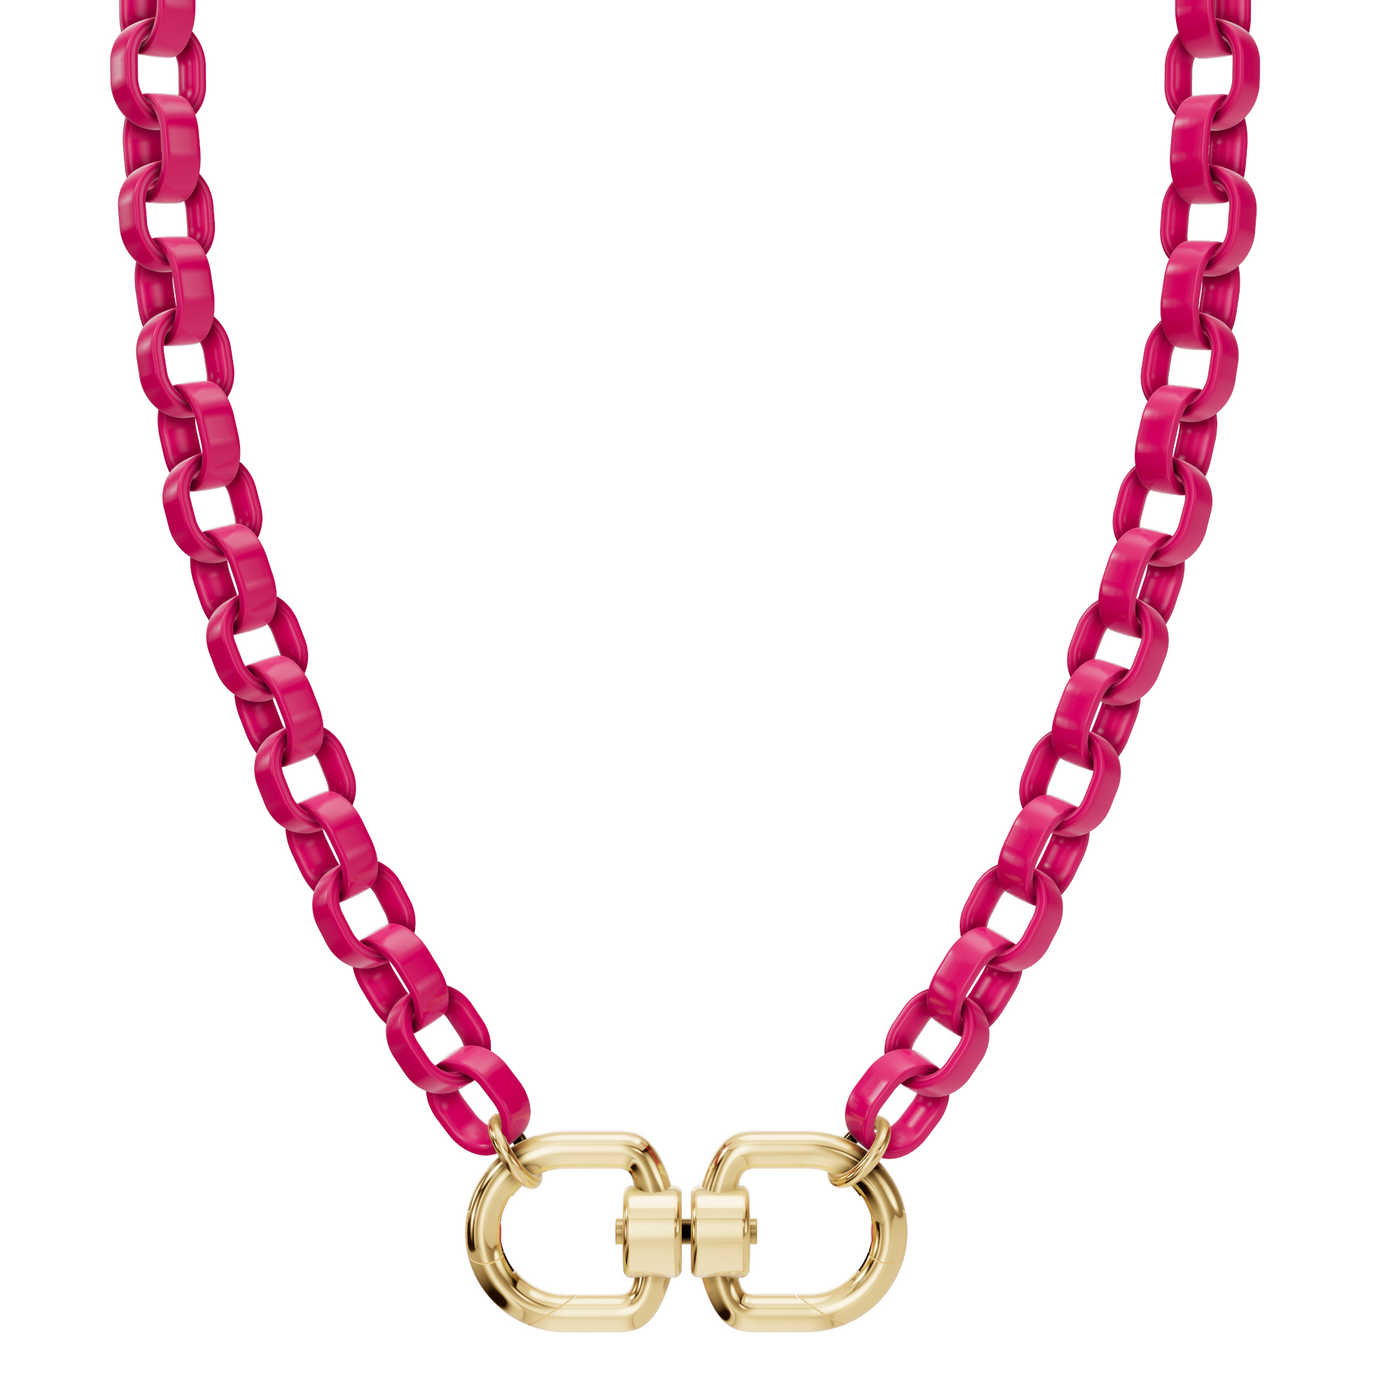 5.6mm Stainless Steel Rubellite Pink Hinge Chain